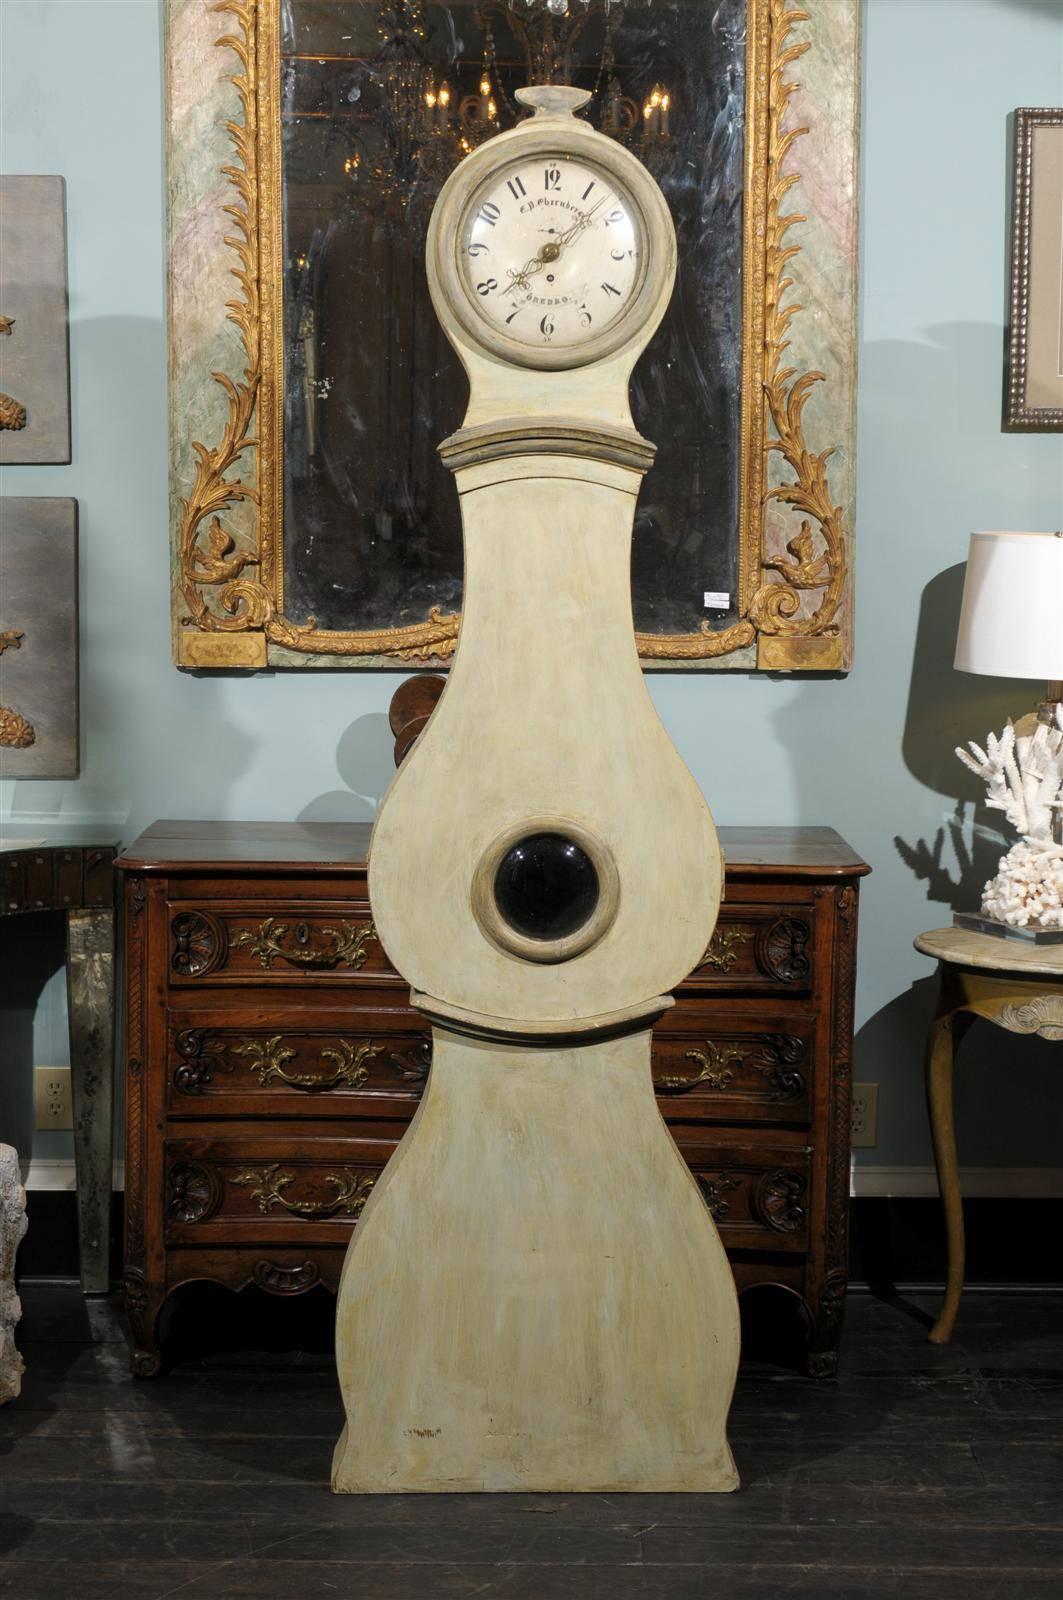 A 19th century Swedish painted wood clock with small carving at the crest, large round belly and flat base. Light grey/green color. This clock retains it's original metal face, hands and movement.  Signed E.P Ehrenberg. Orebro.

This clock would be